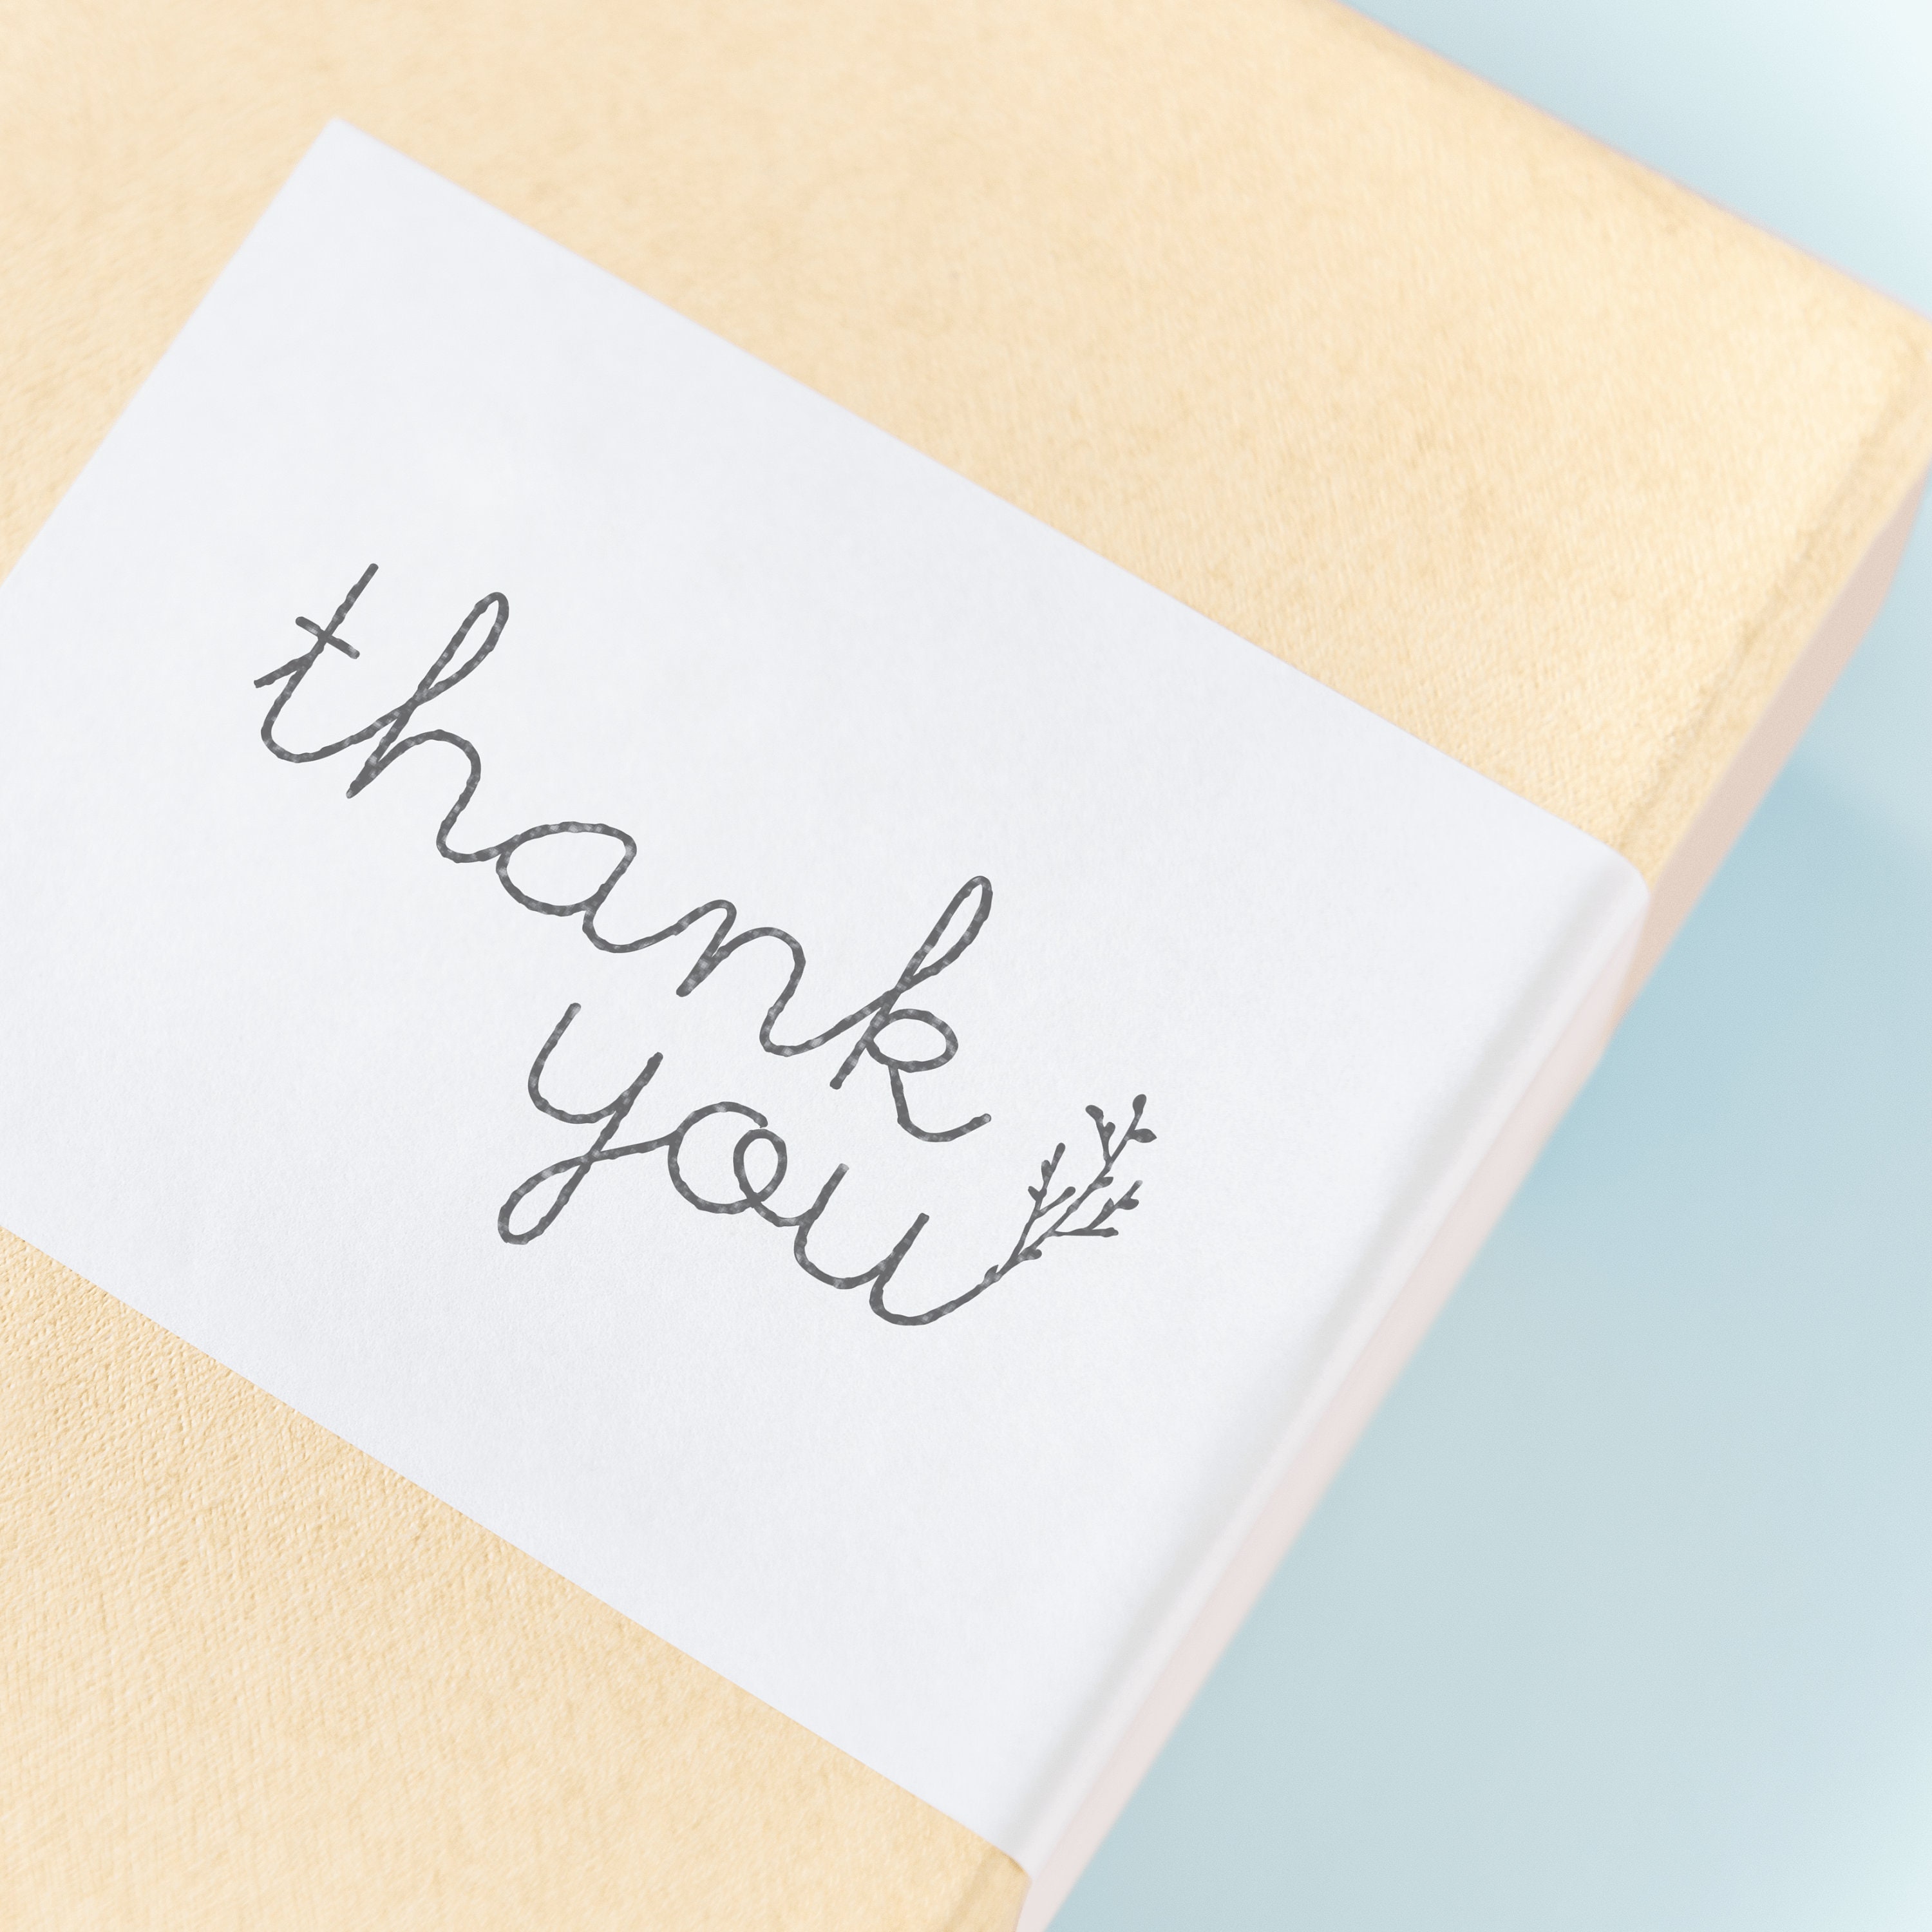 Thank You Blue Rectangle Stamp Stock Photo by ©outchill 380074392